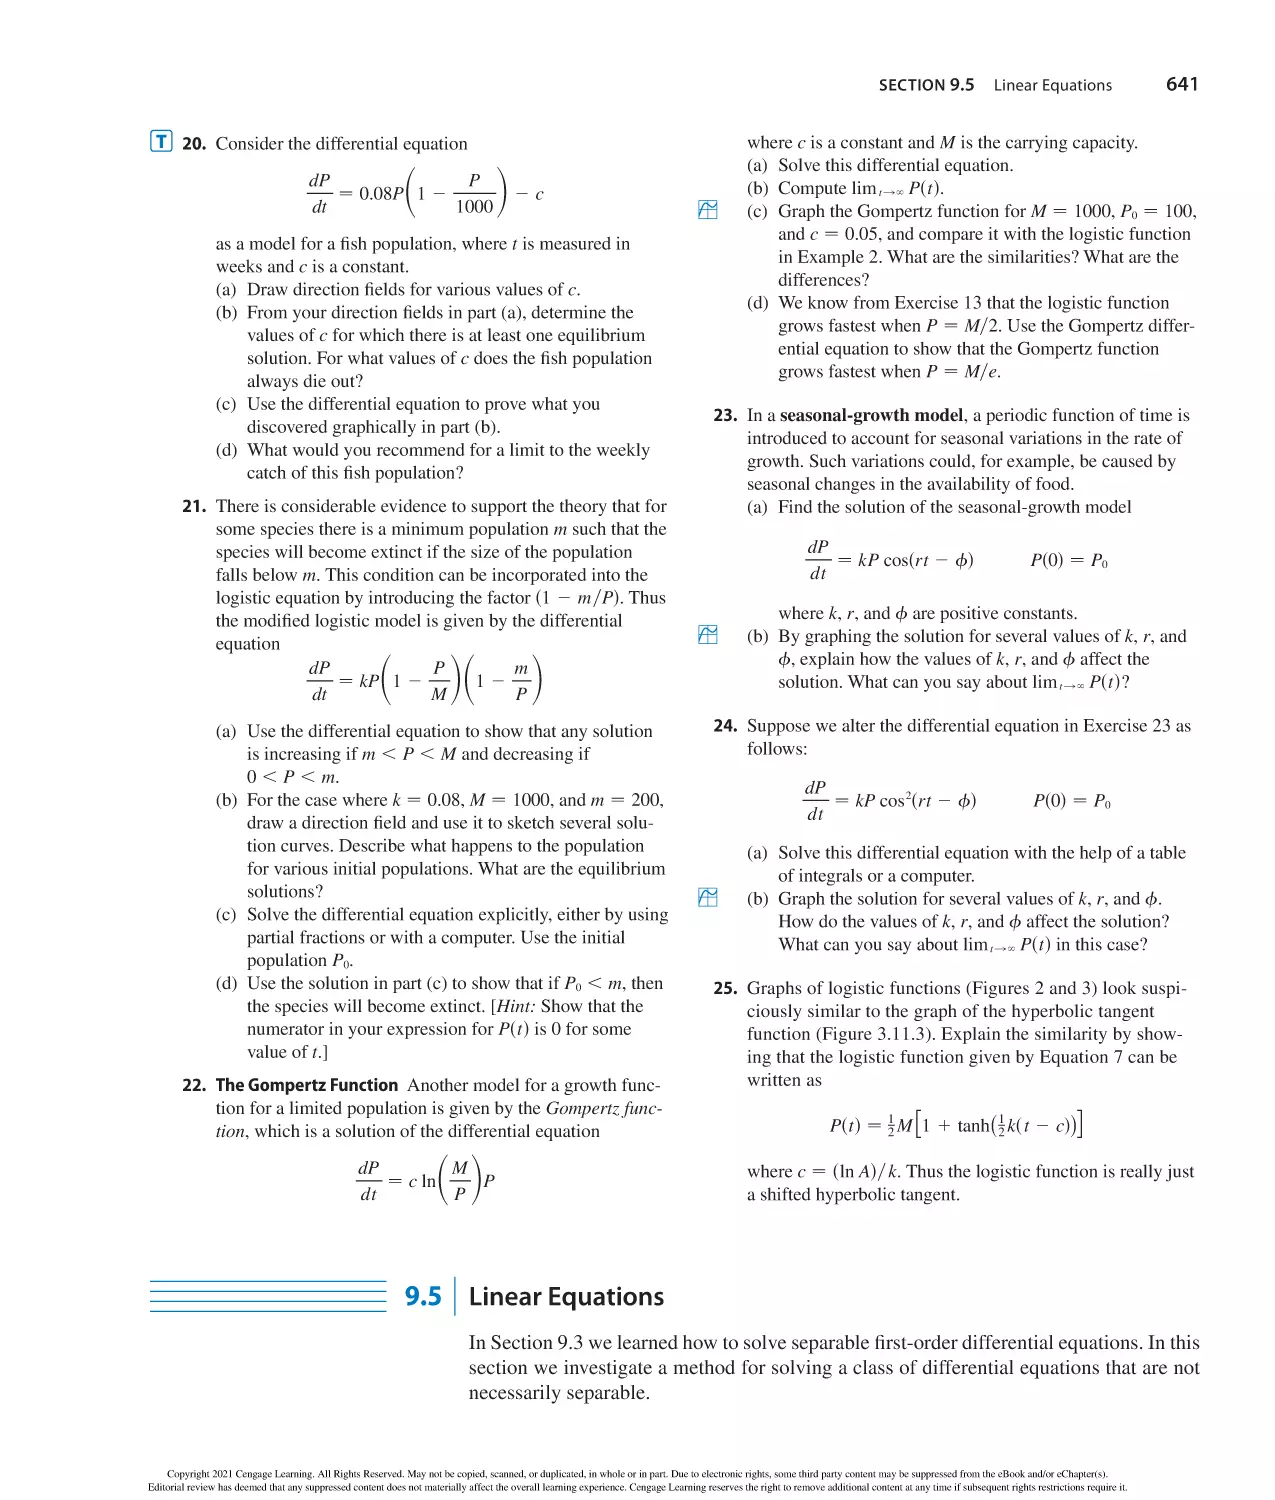 9.5 Linear Equations